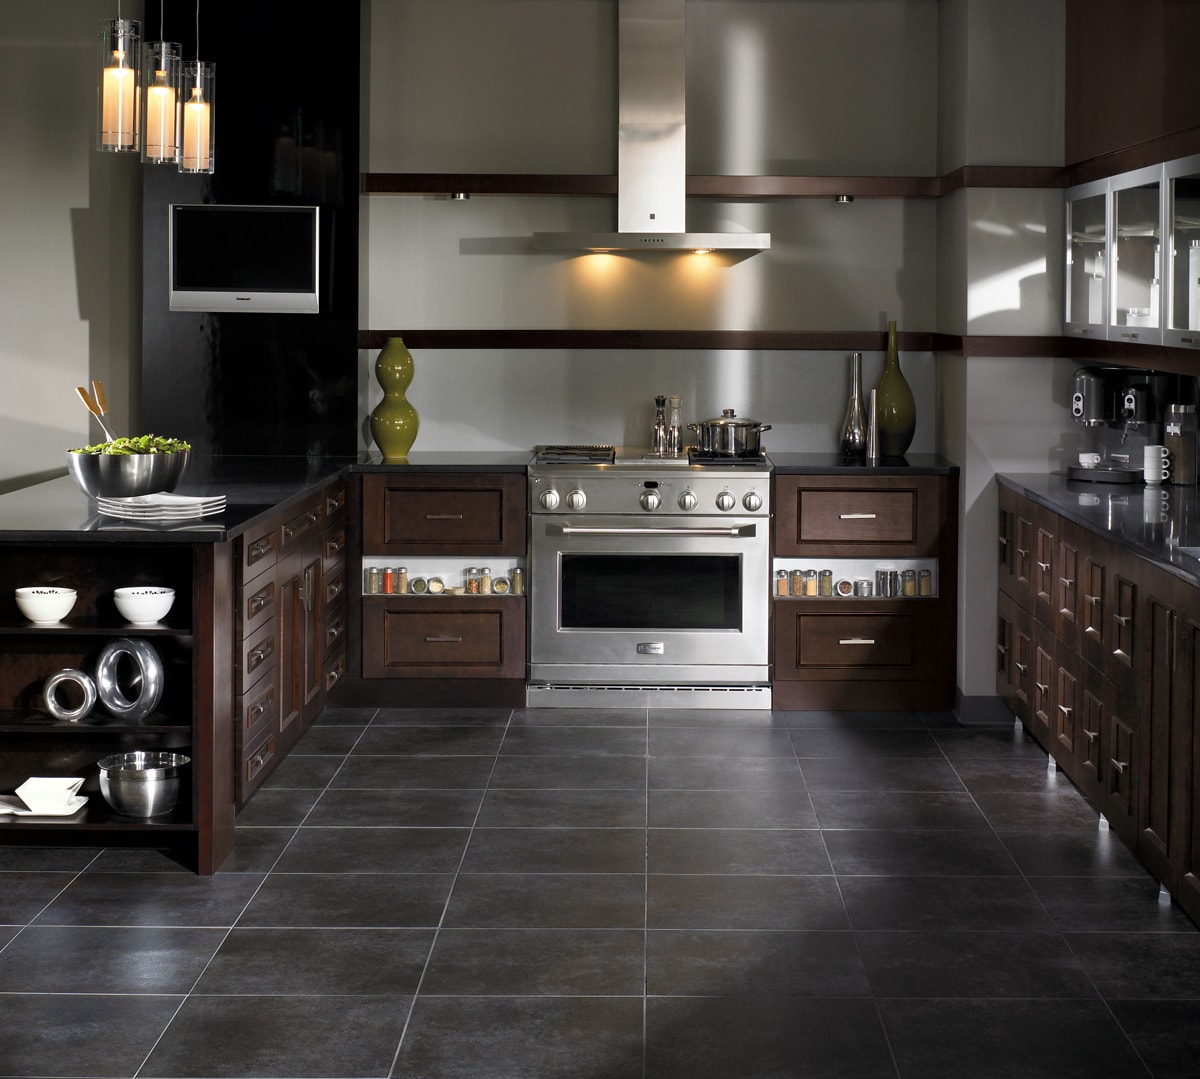 Brown Contemporary-style kitchen with open shelving beside the stove containing spices.